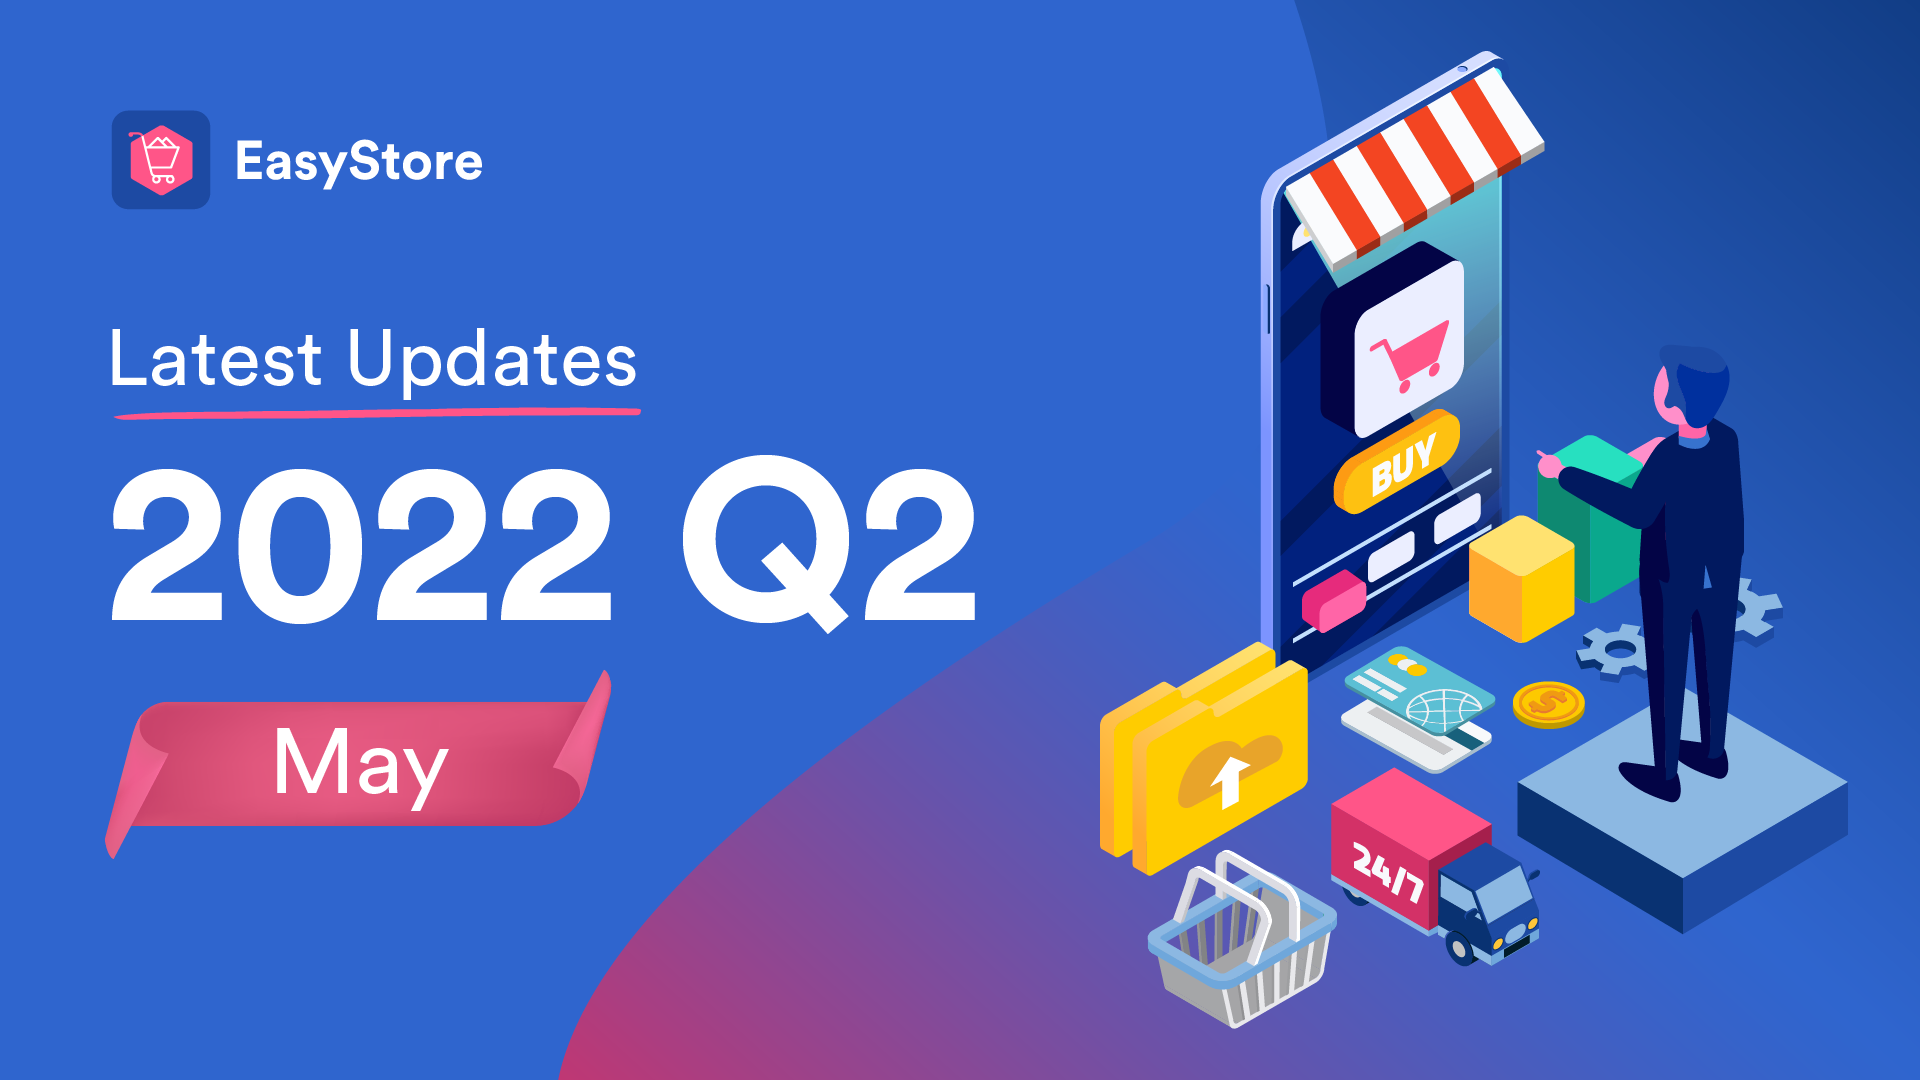 easystore-latest-updates-may-2022